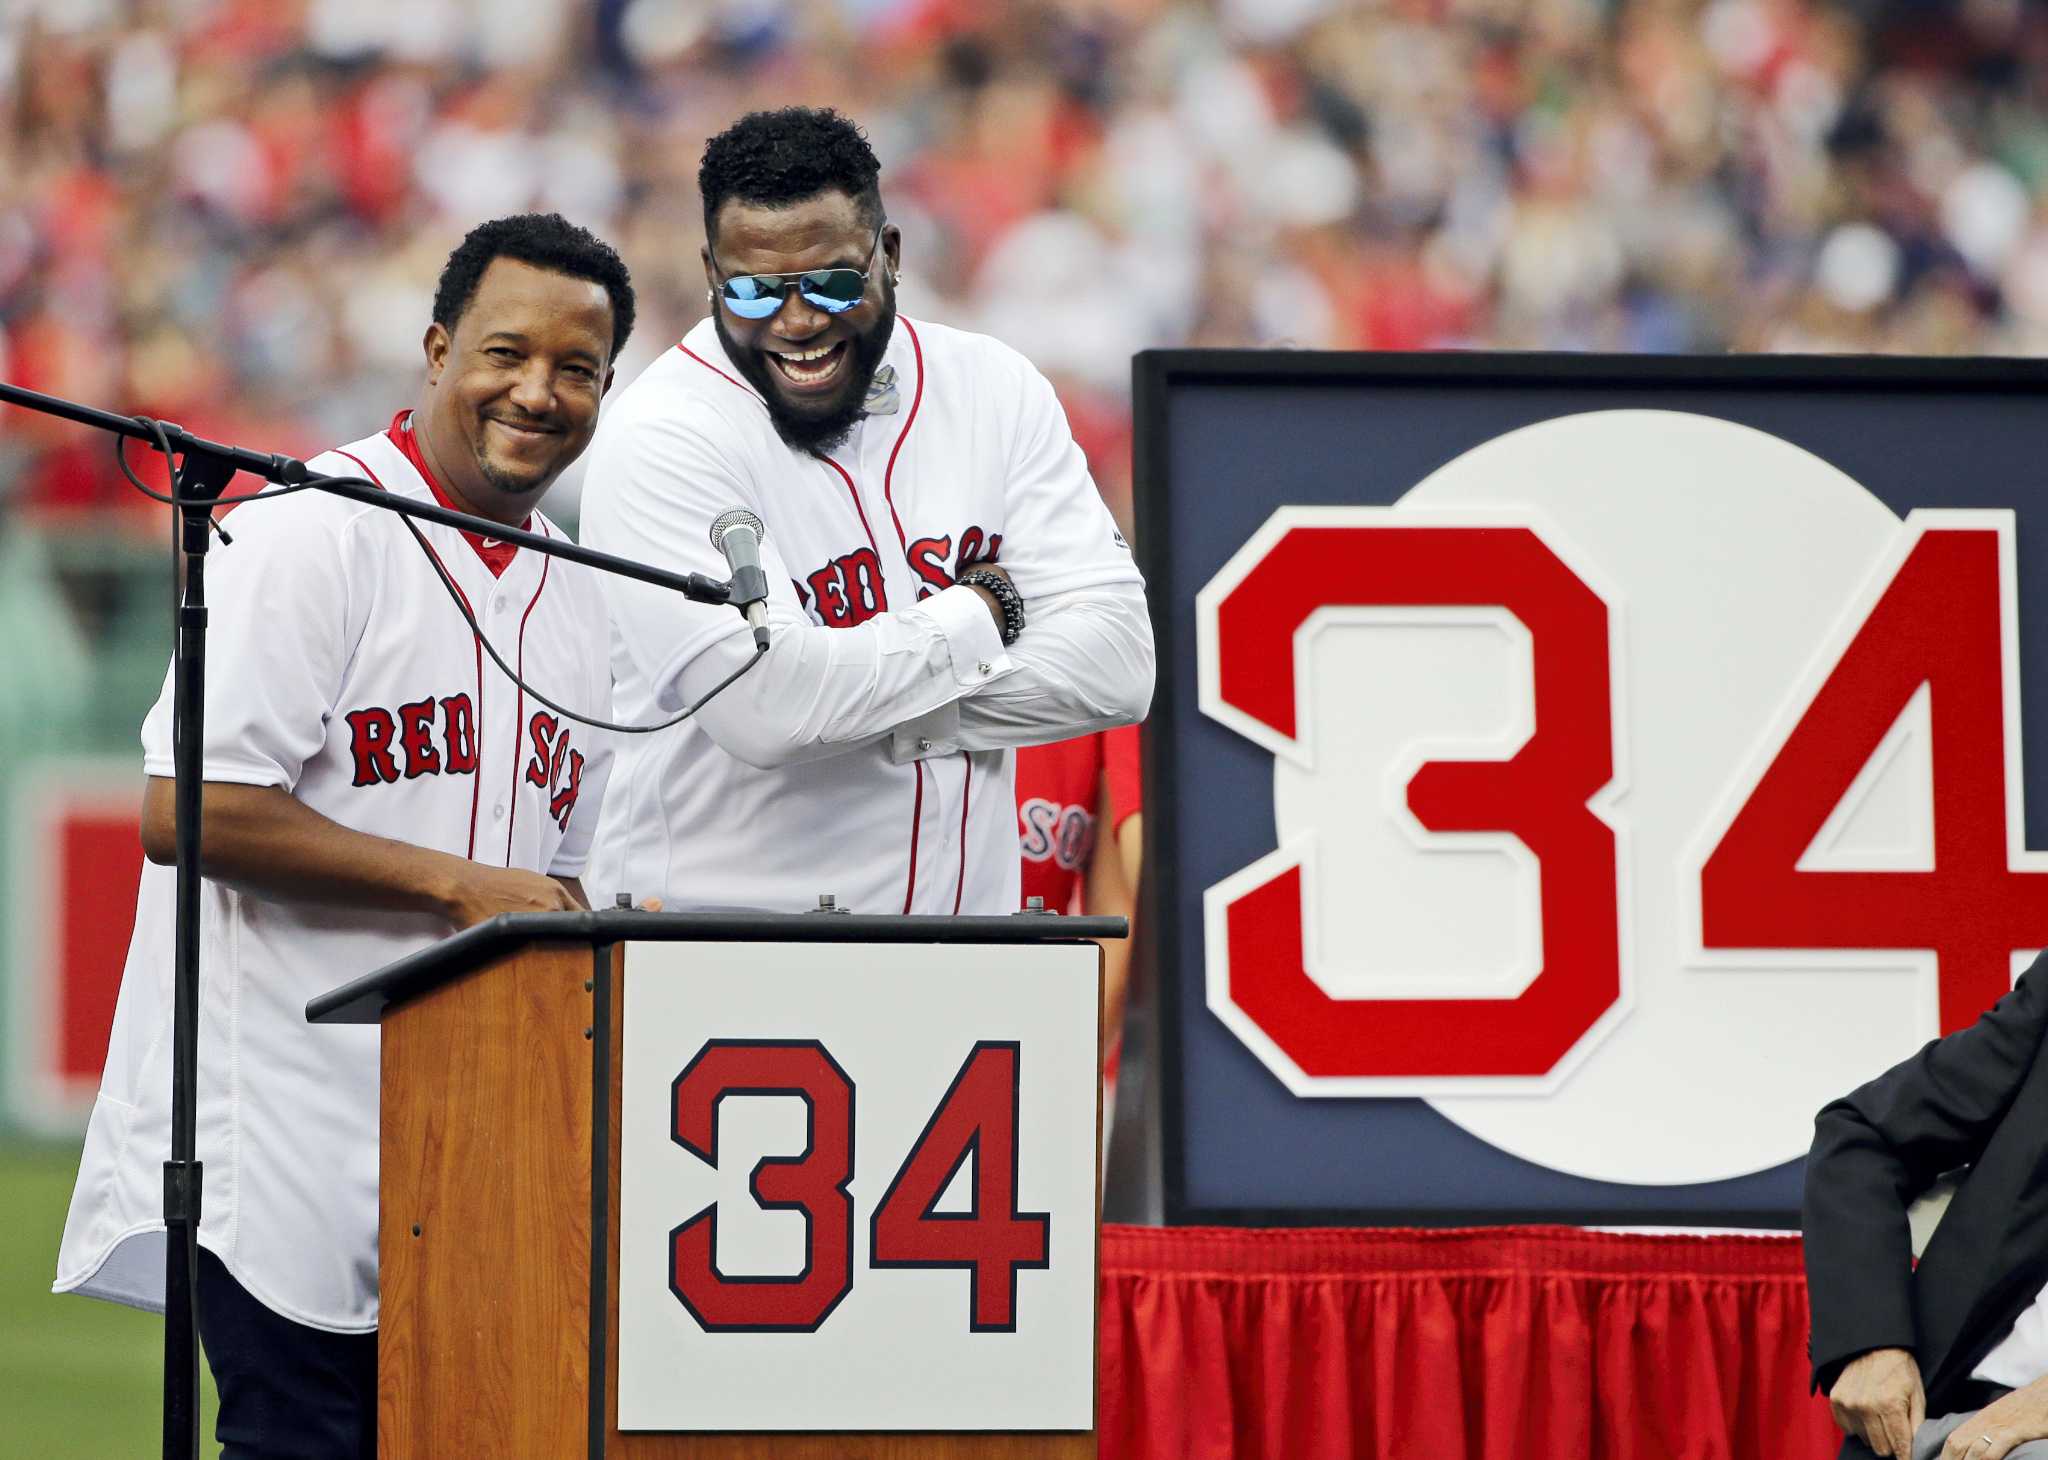 Red Sox to retire Boggs' number after Hall of Fame career